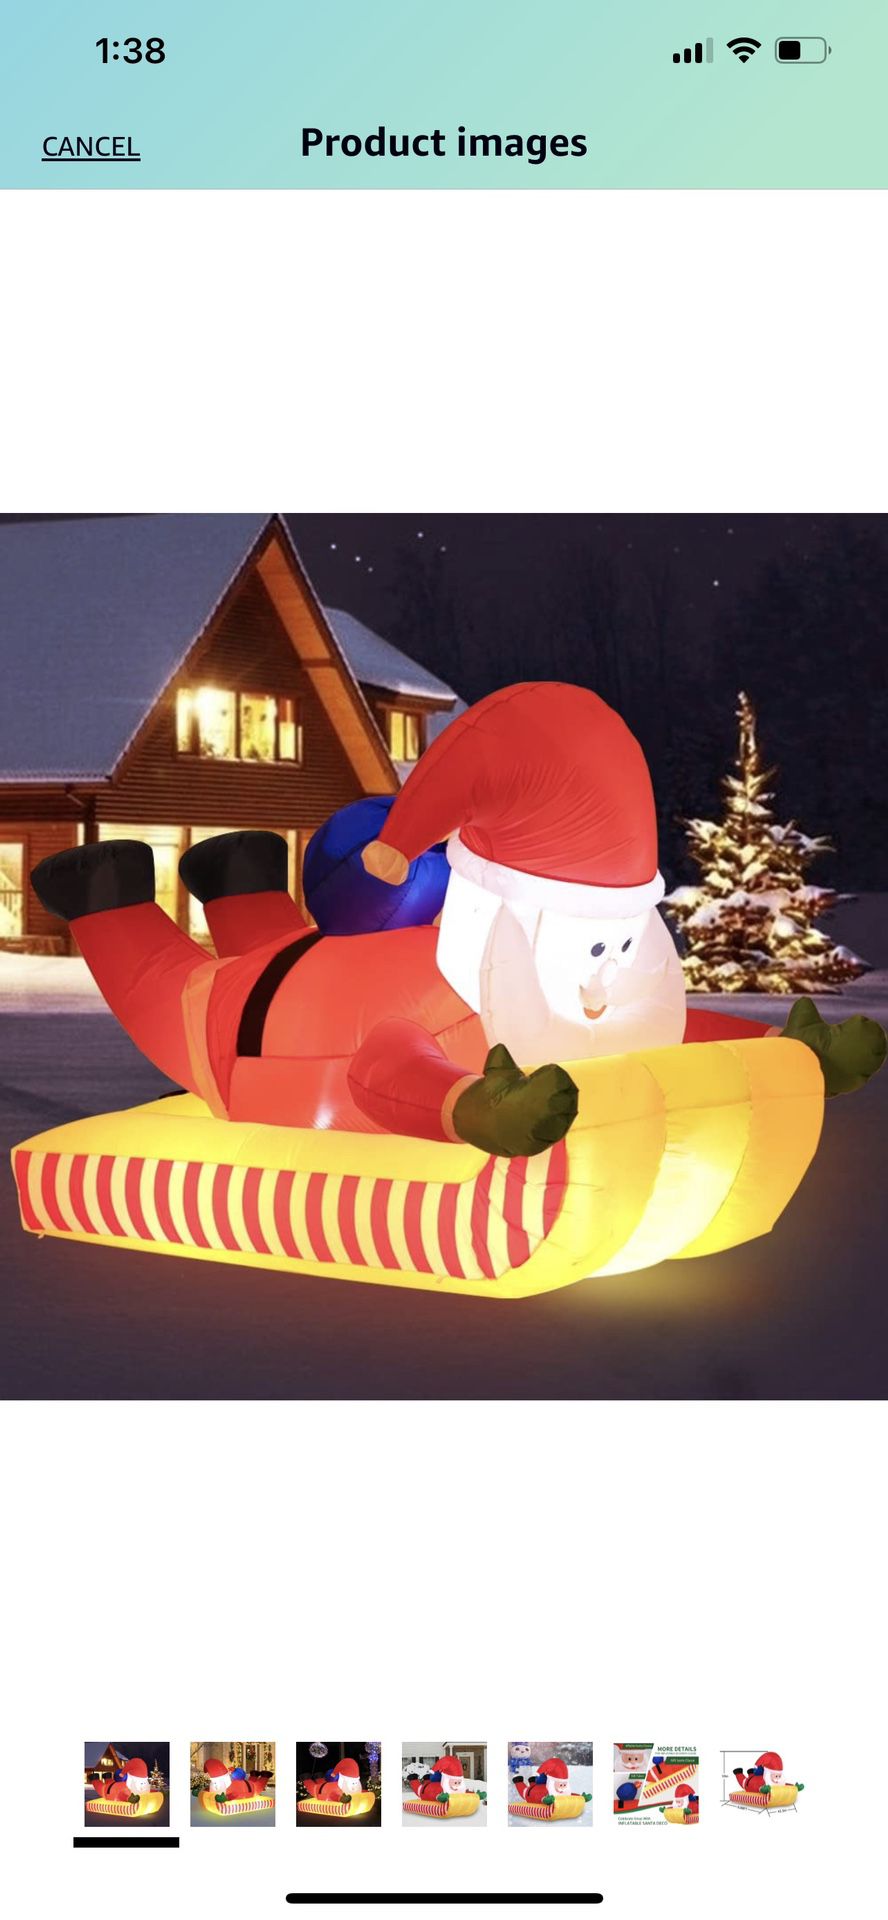 7FT Christmas Inflatable Outdoor Skiing Santa Claus for Yard Decoration , Downhill Snowboard Xmas Santa Deco Clearance Blow Up with Built-in LED Light